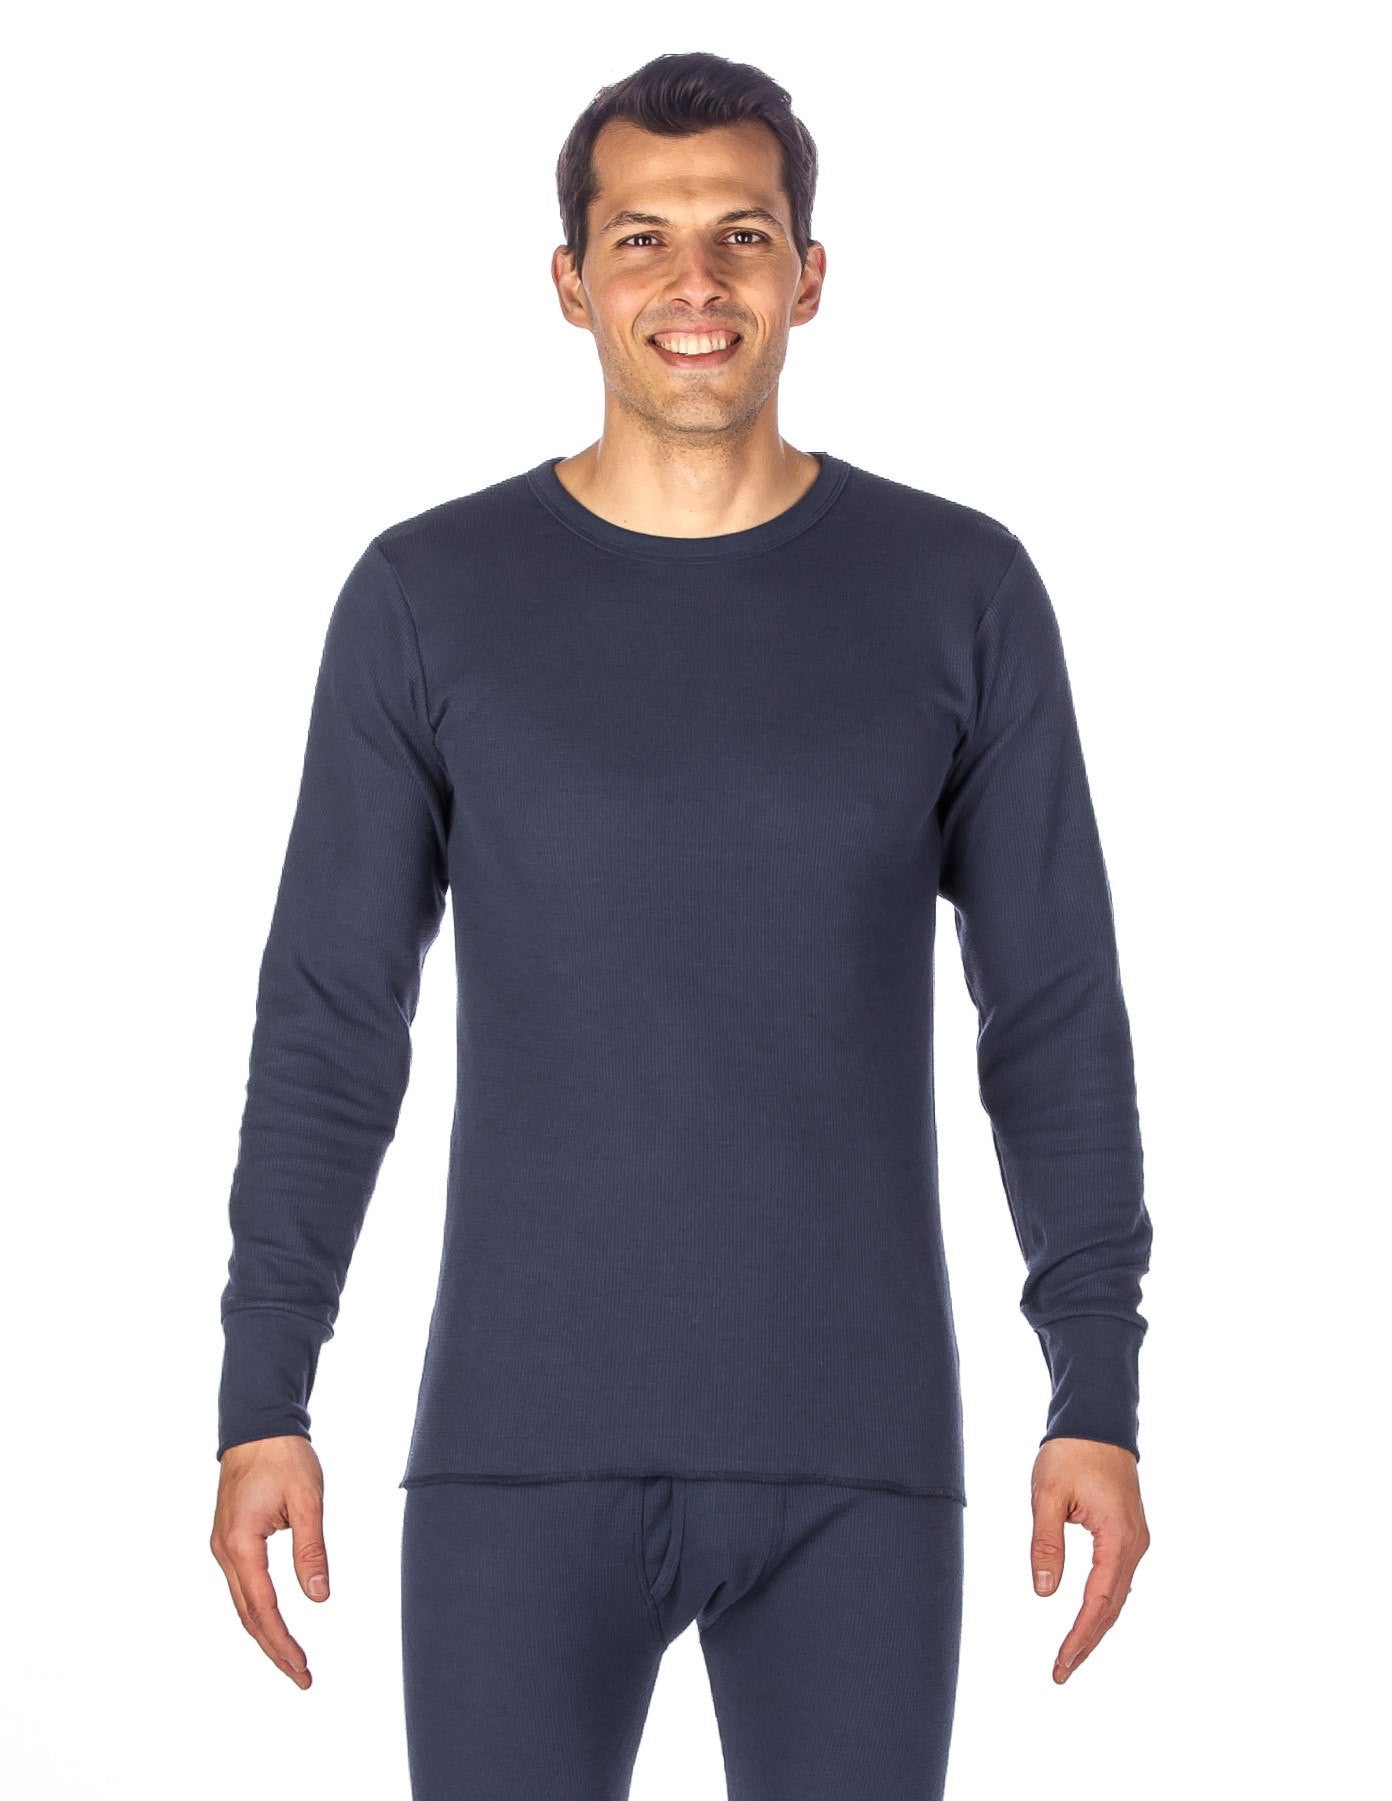 Men's Extreme Cold Waffle Knit Thermal Crew Top